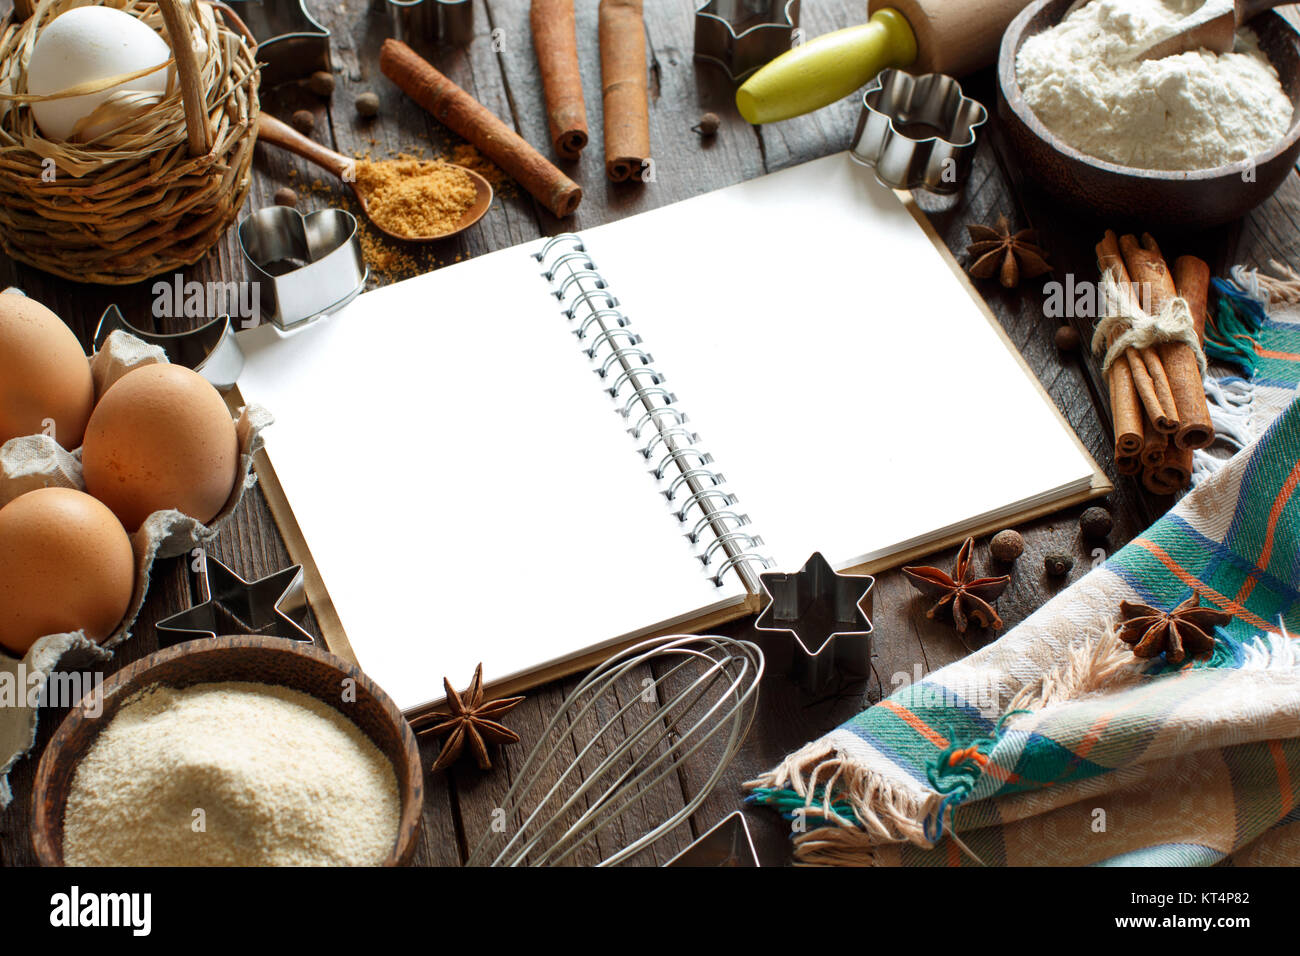 Cooking book and utensils Stock Photo